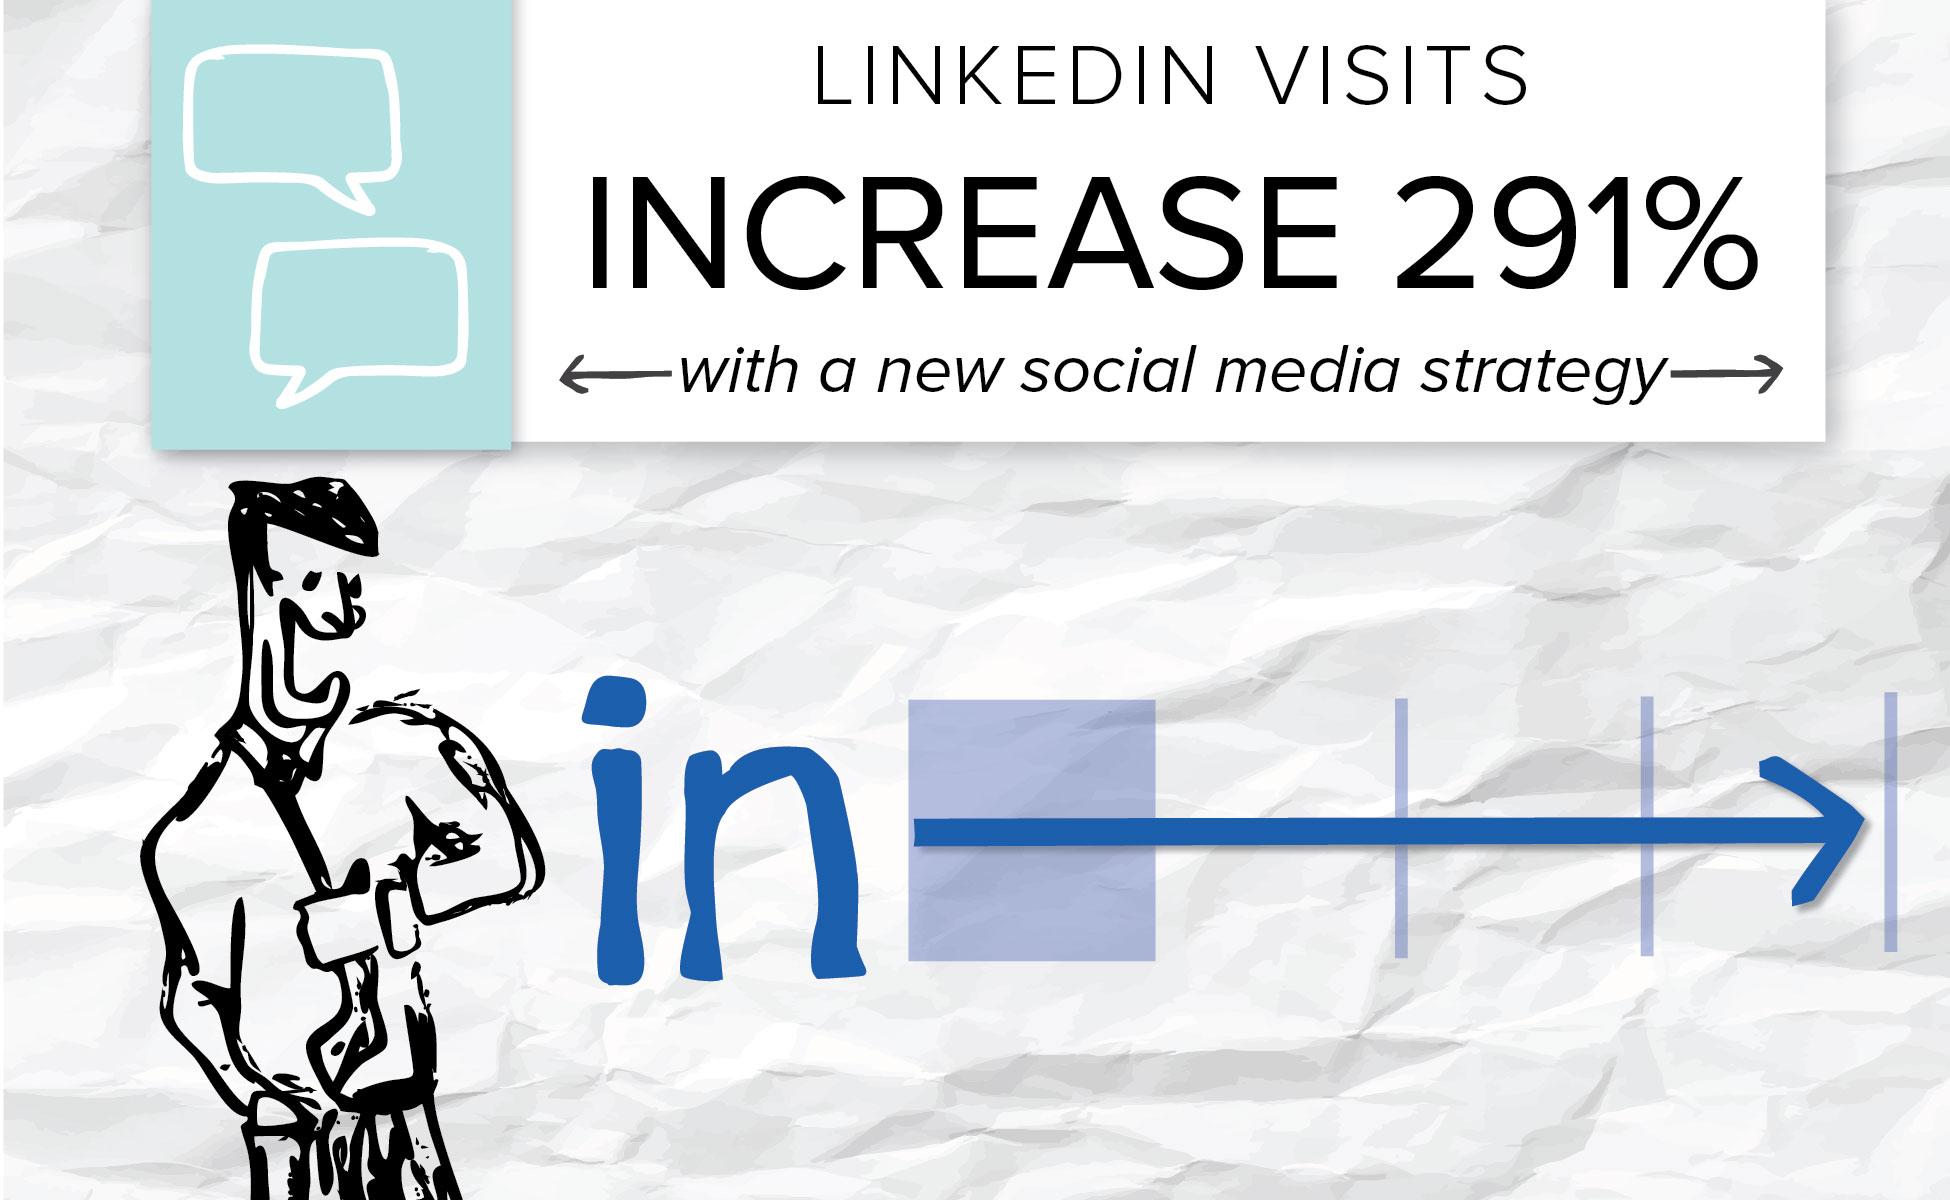 This telecom company worked with our social team to build a LinkedIn marketing strategy to increased web traffic.